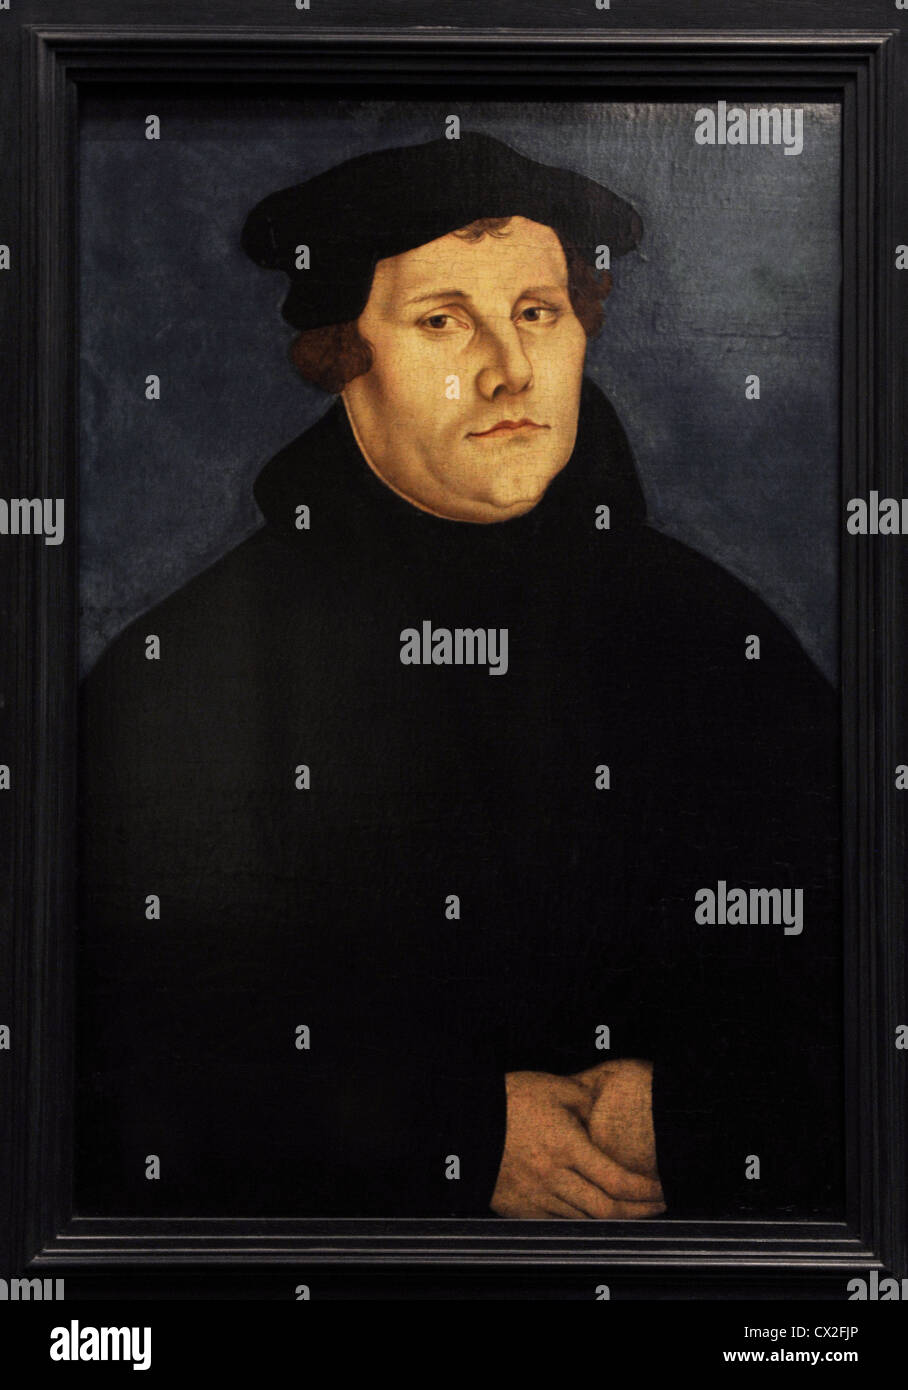 Martin Luther (1483-1546). German monk, icon of the Protestant Reformation. Portrait by Lucas Cranach the Elder, 1529. Stock Photo